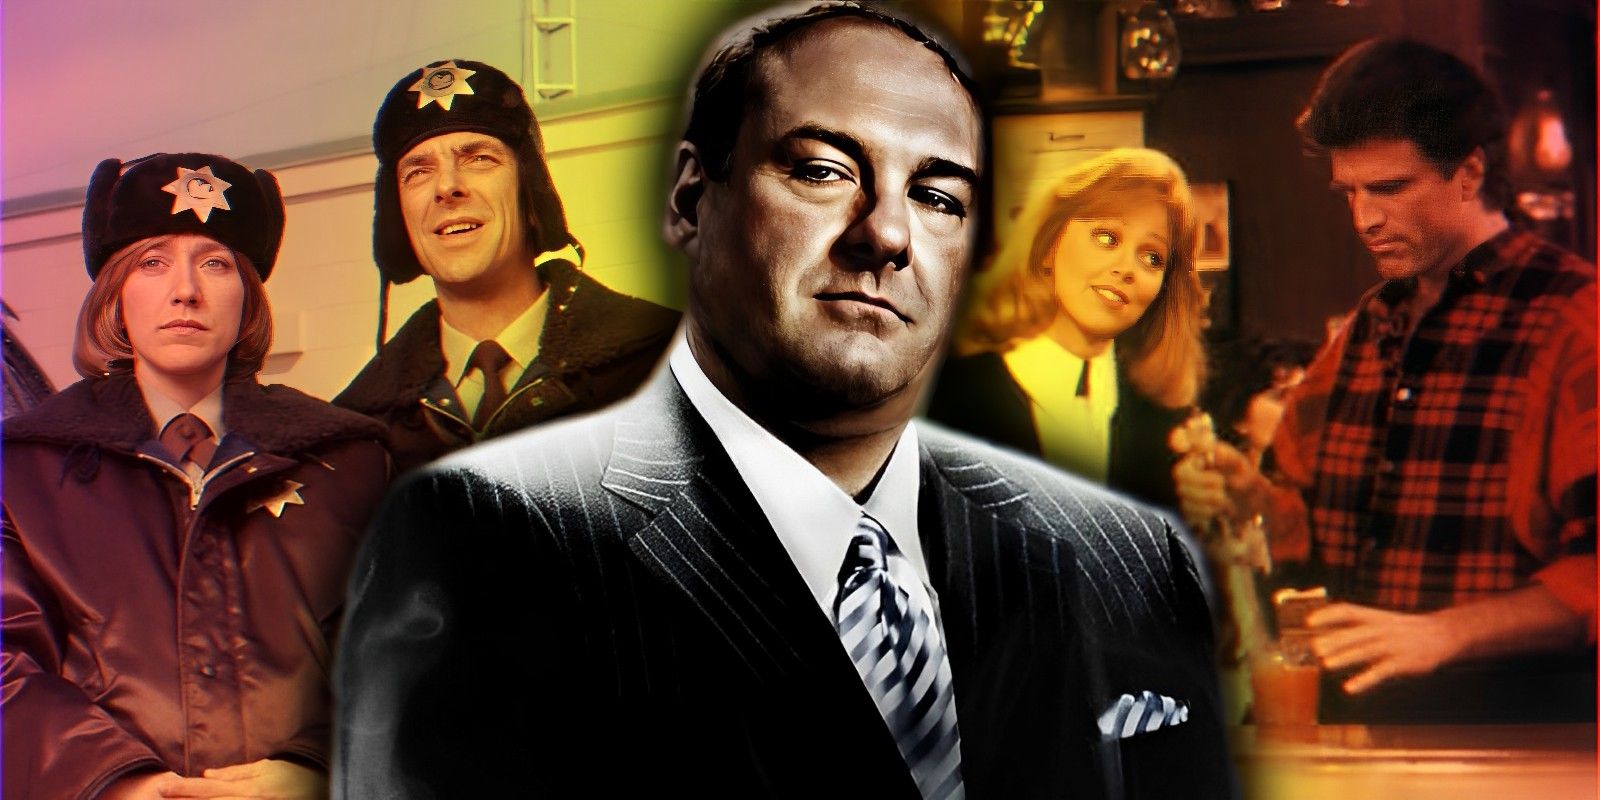 A closeup of Tony Soprano alongside two officers from Fargo and Sam and Diane smiling in Cheers.